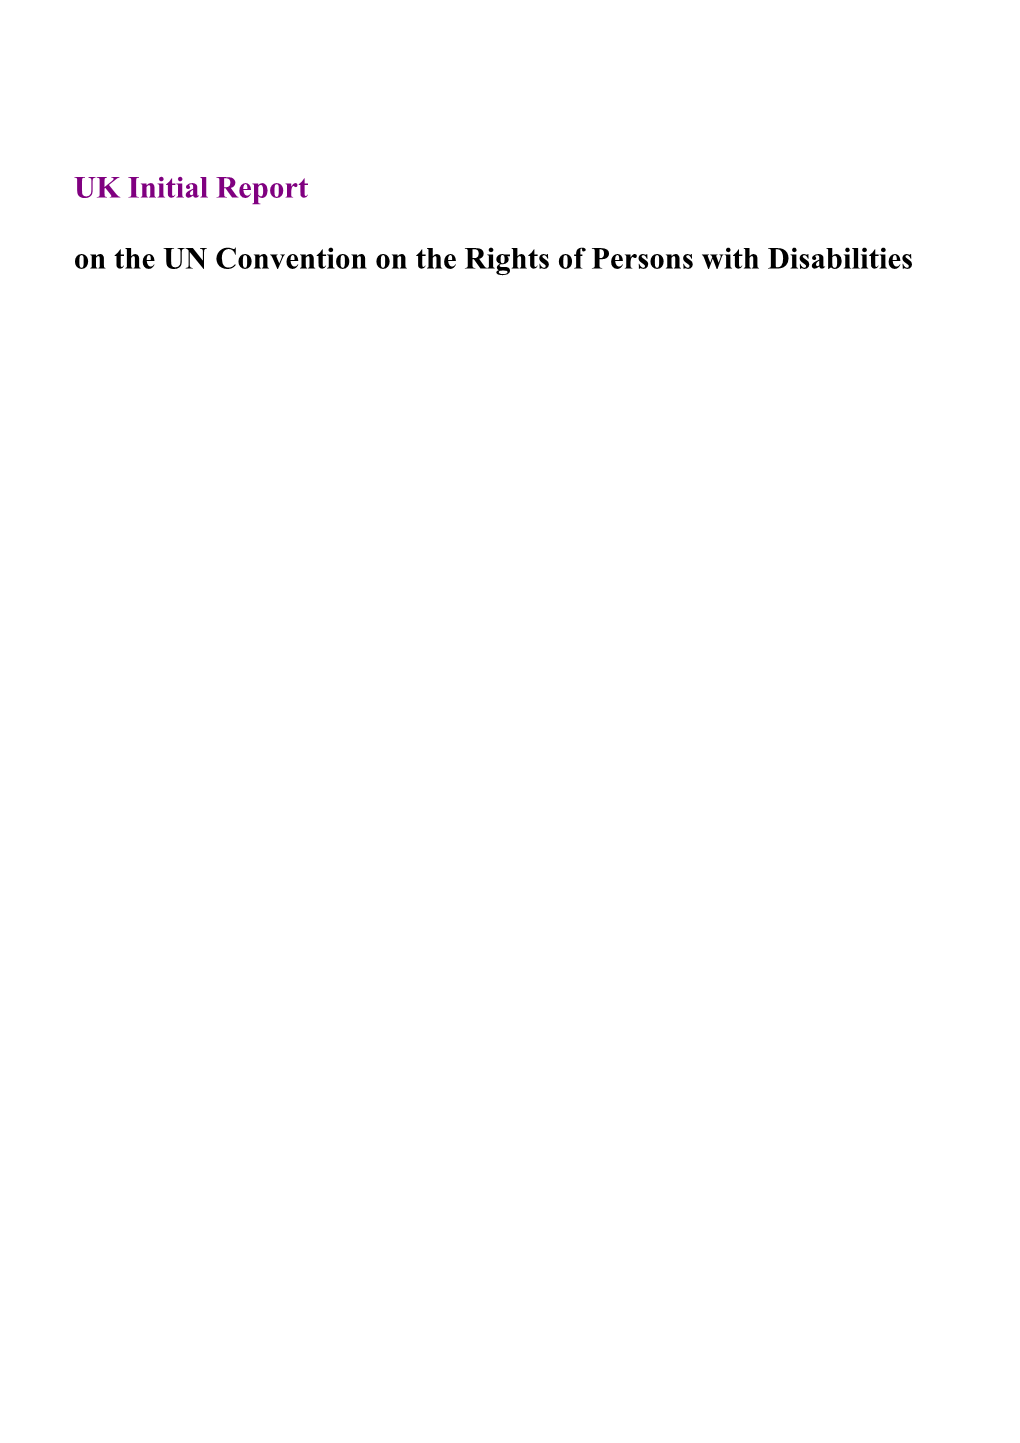 On the UN Convention on the Rights of Persons with Disabilities